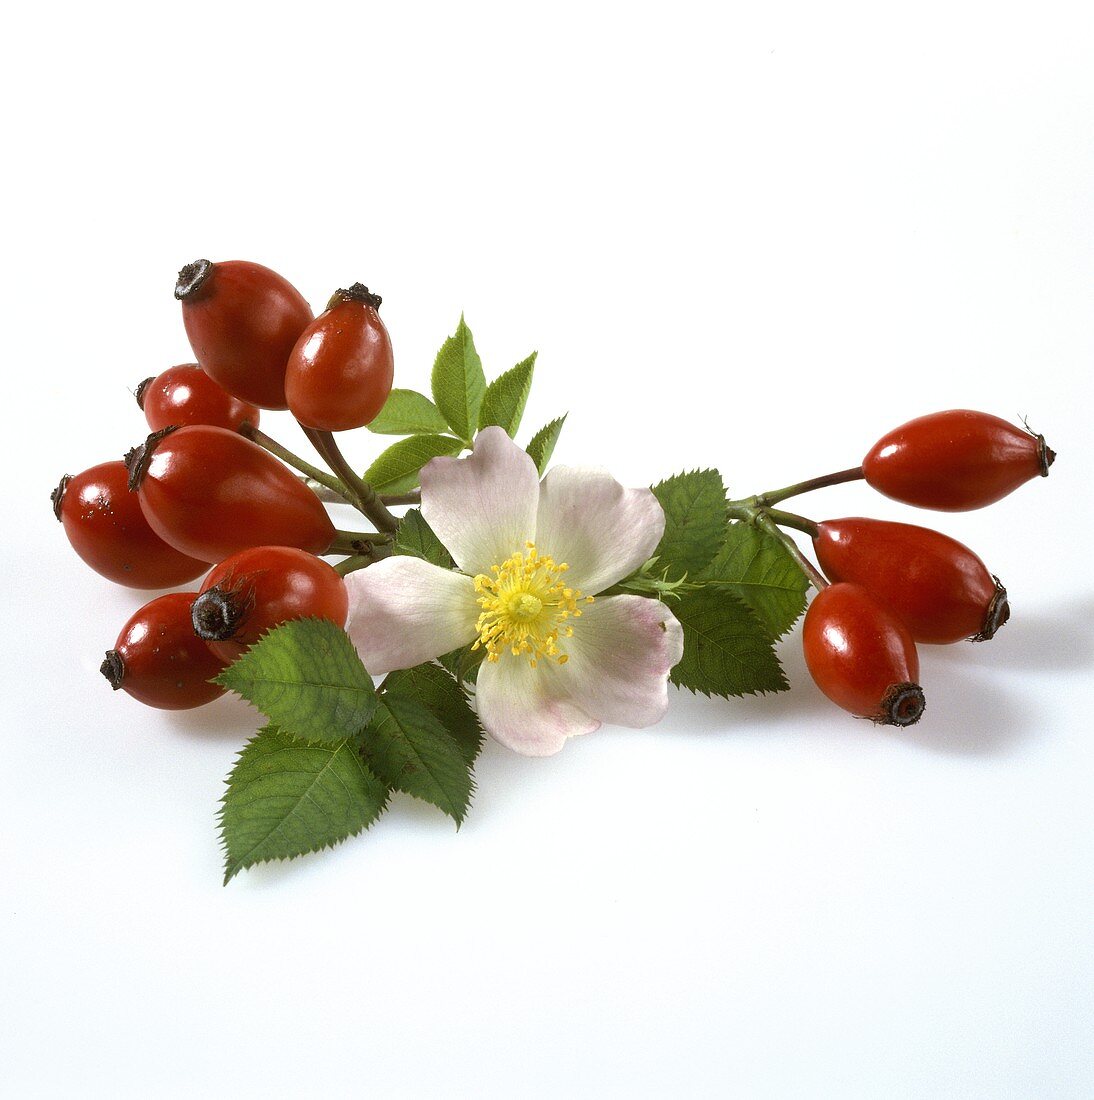 Rose hips with leaves and one flower